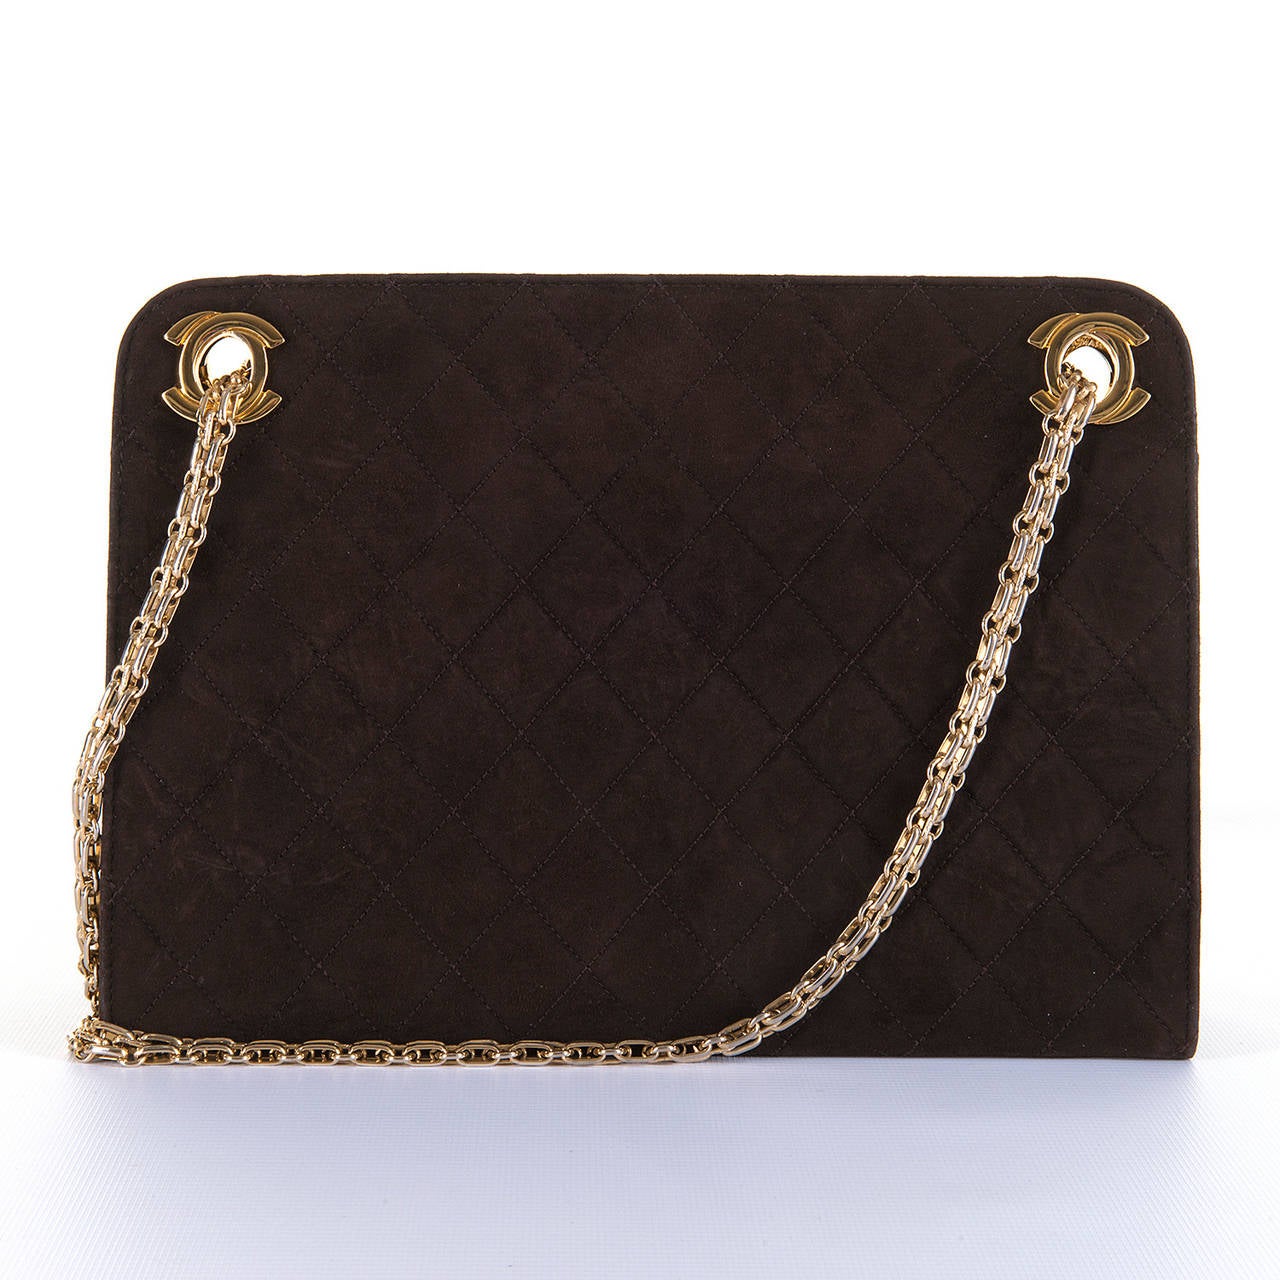 Women's An Elegant Chanel Quilted Handbag, in Choc. Brown with Goldtone Hardware